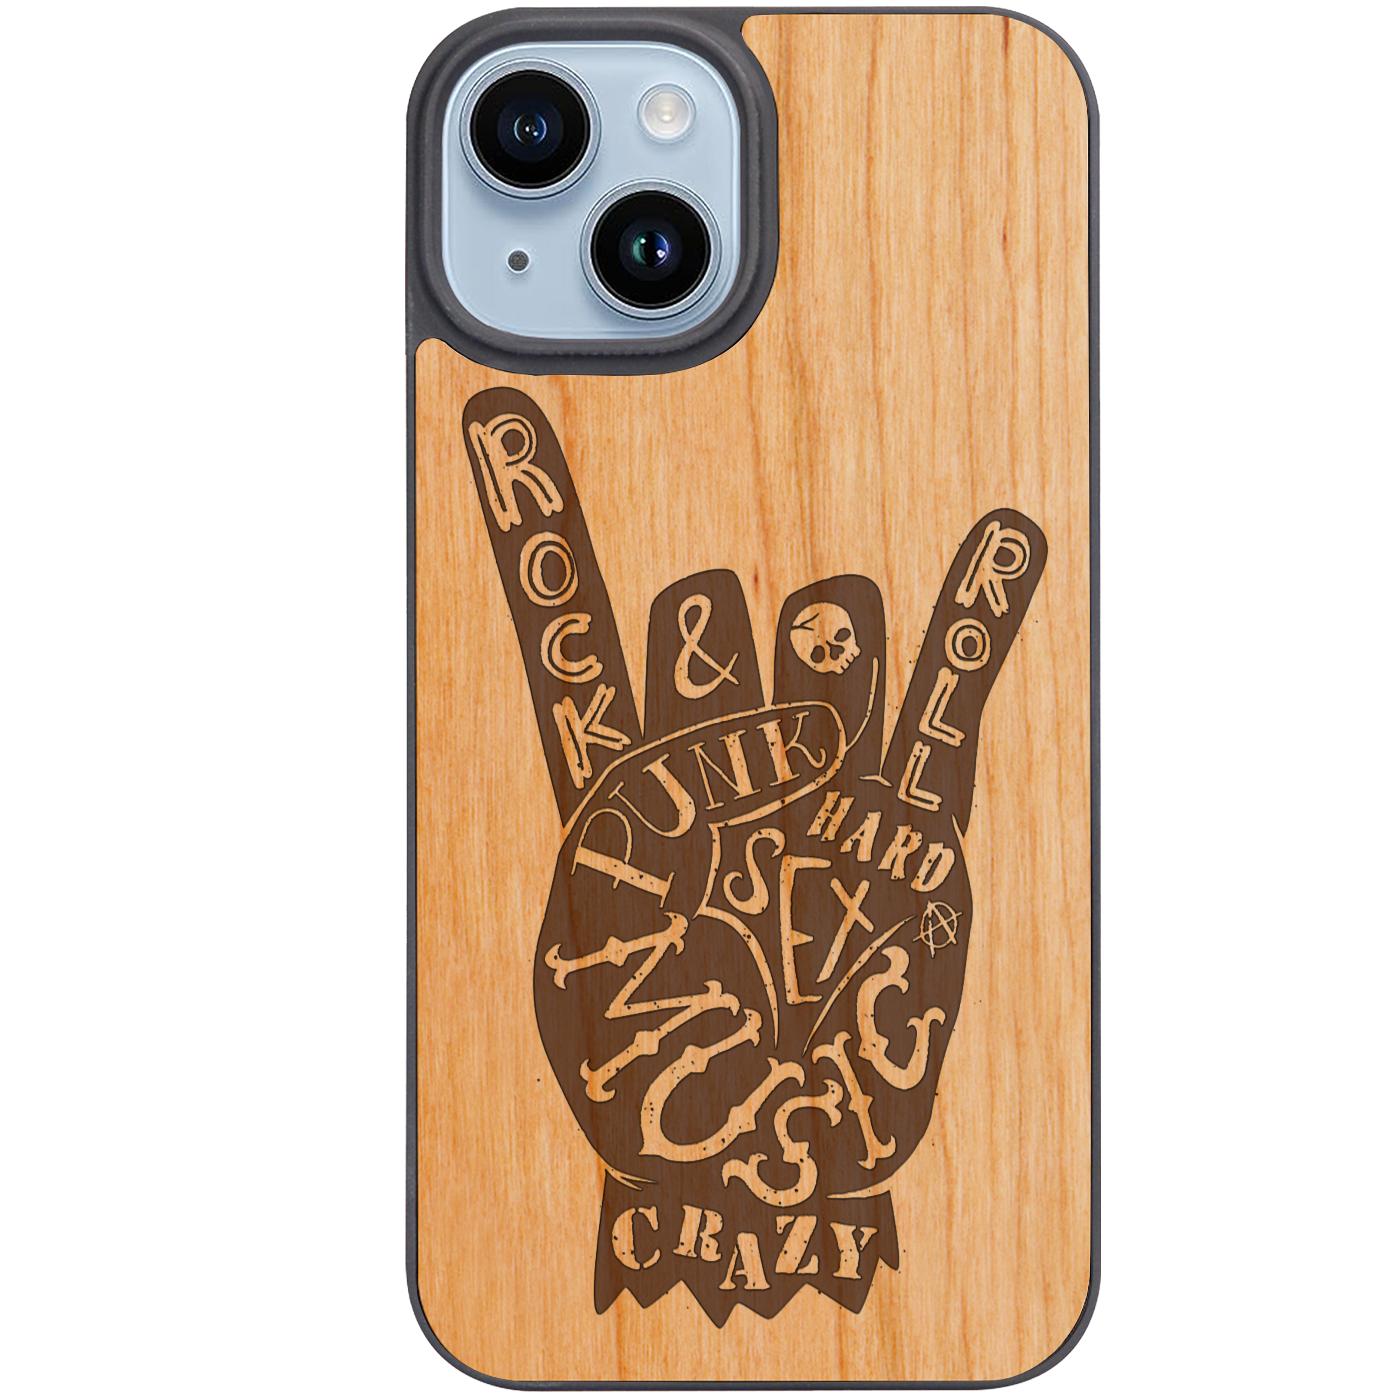 Rock n Roll Hand - Engraved Phone Case